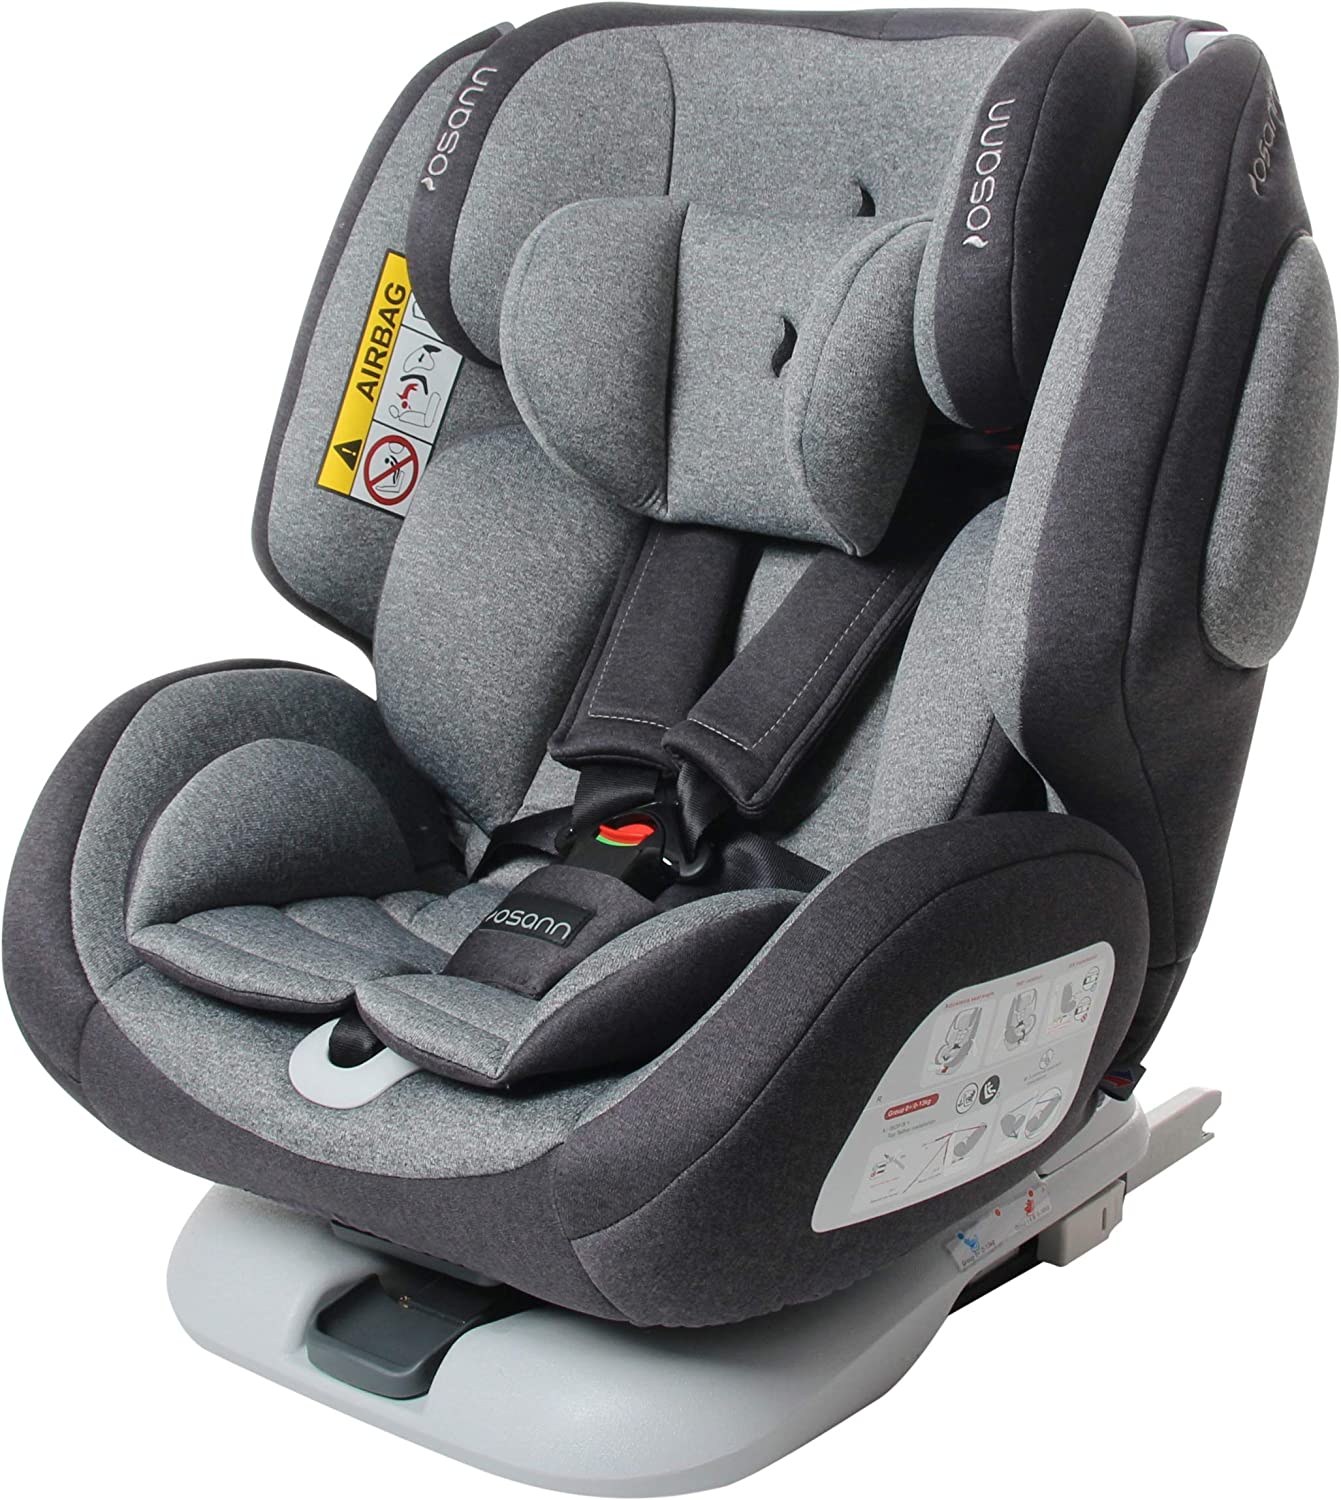 Osann One360 SL Child Seat Group 0+/1/2/3 (0 - 36 kg), Reboarder Child Seat with Isofix and Base - Universe Grey